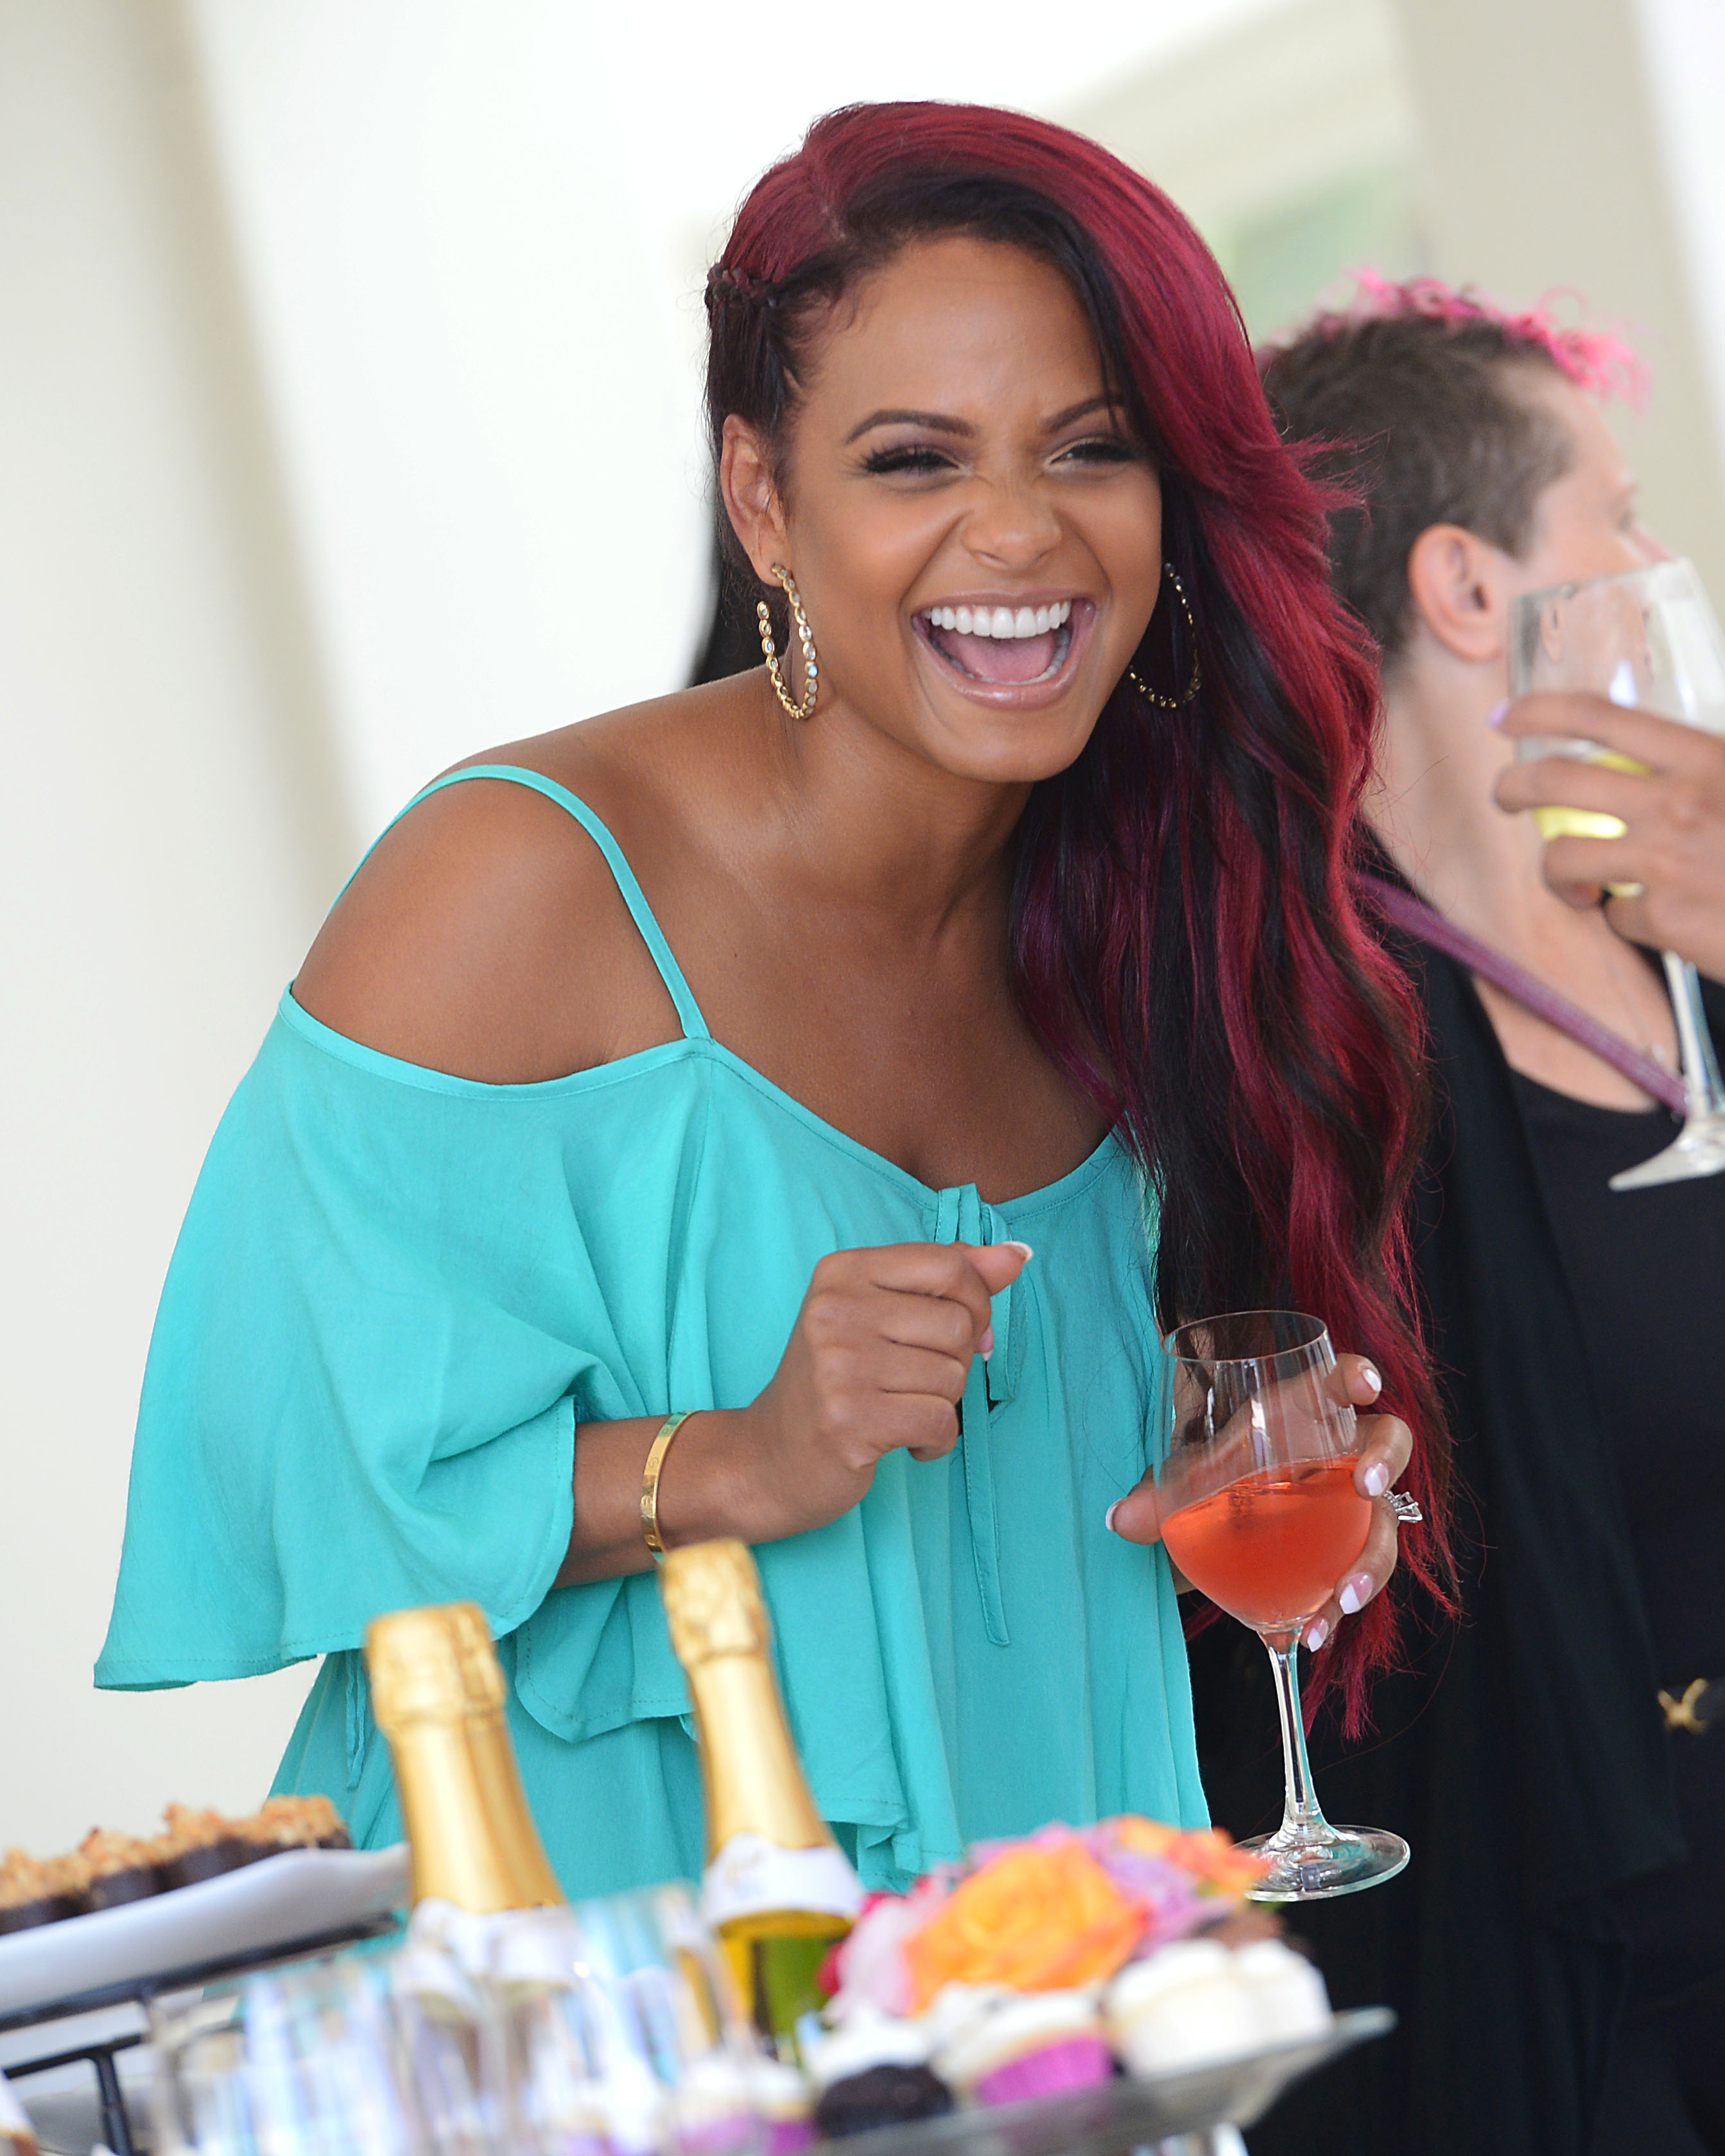 Christina Milian Hosts Viva Diva Wines Launch Party at The Revolve Beach House on August 3, 2013, Los Angeles, California USA. Photo Credit Brian Lindensmith. Copyright All Access Photo Agency.